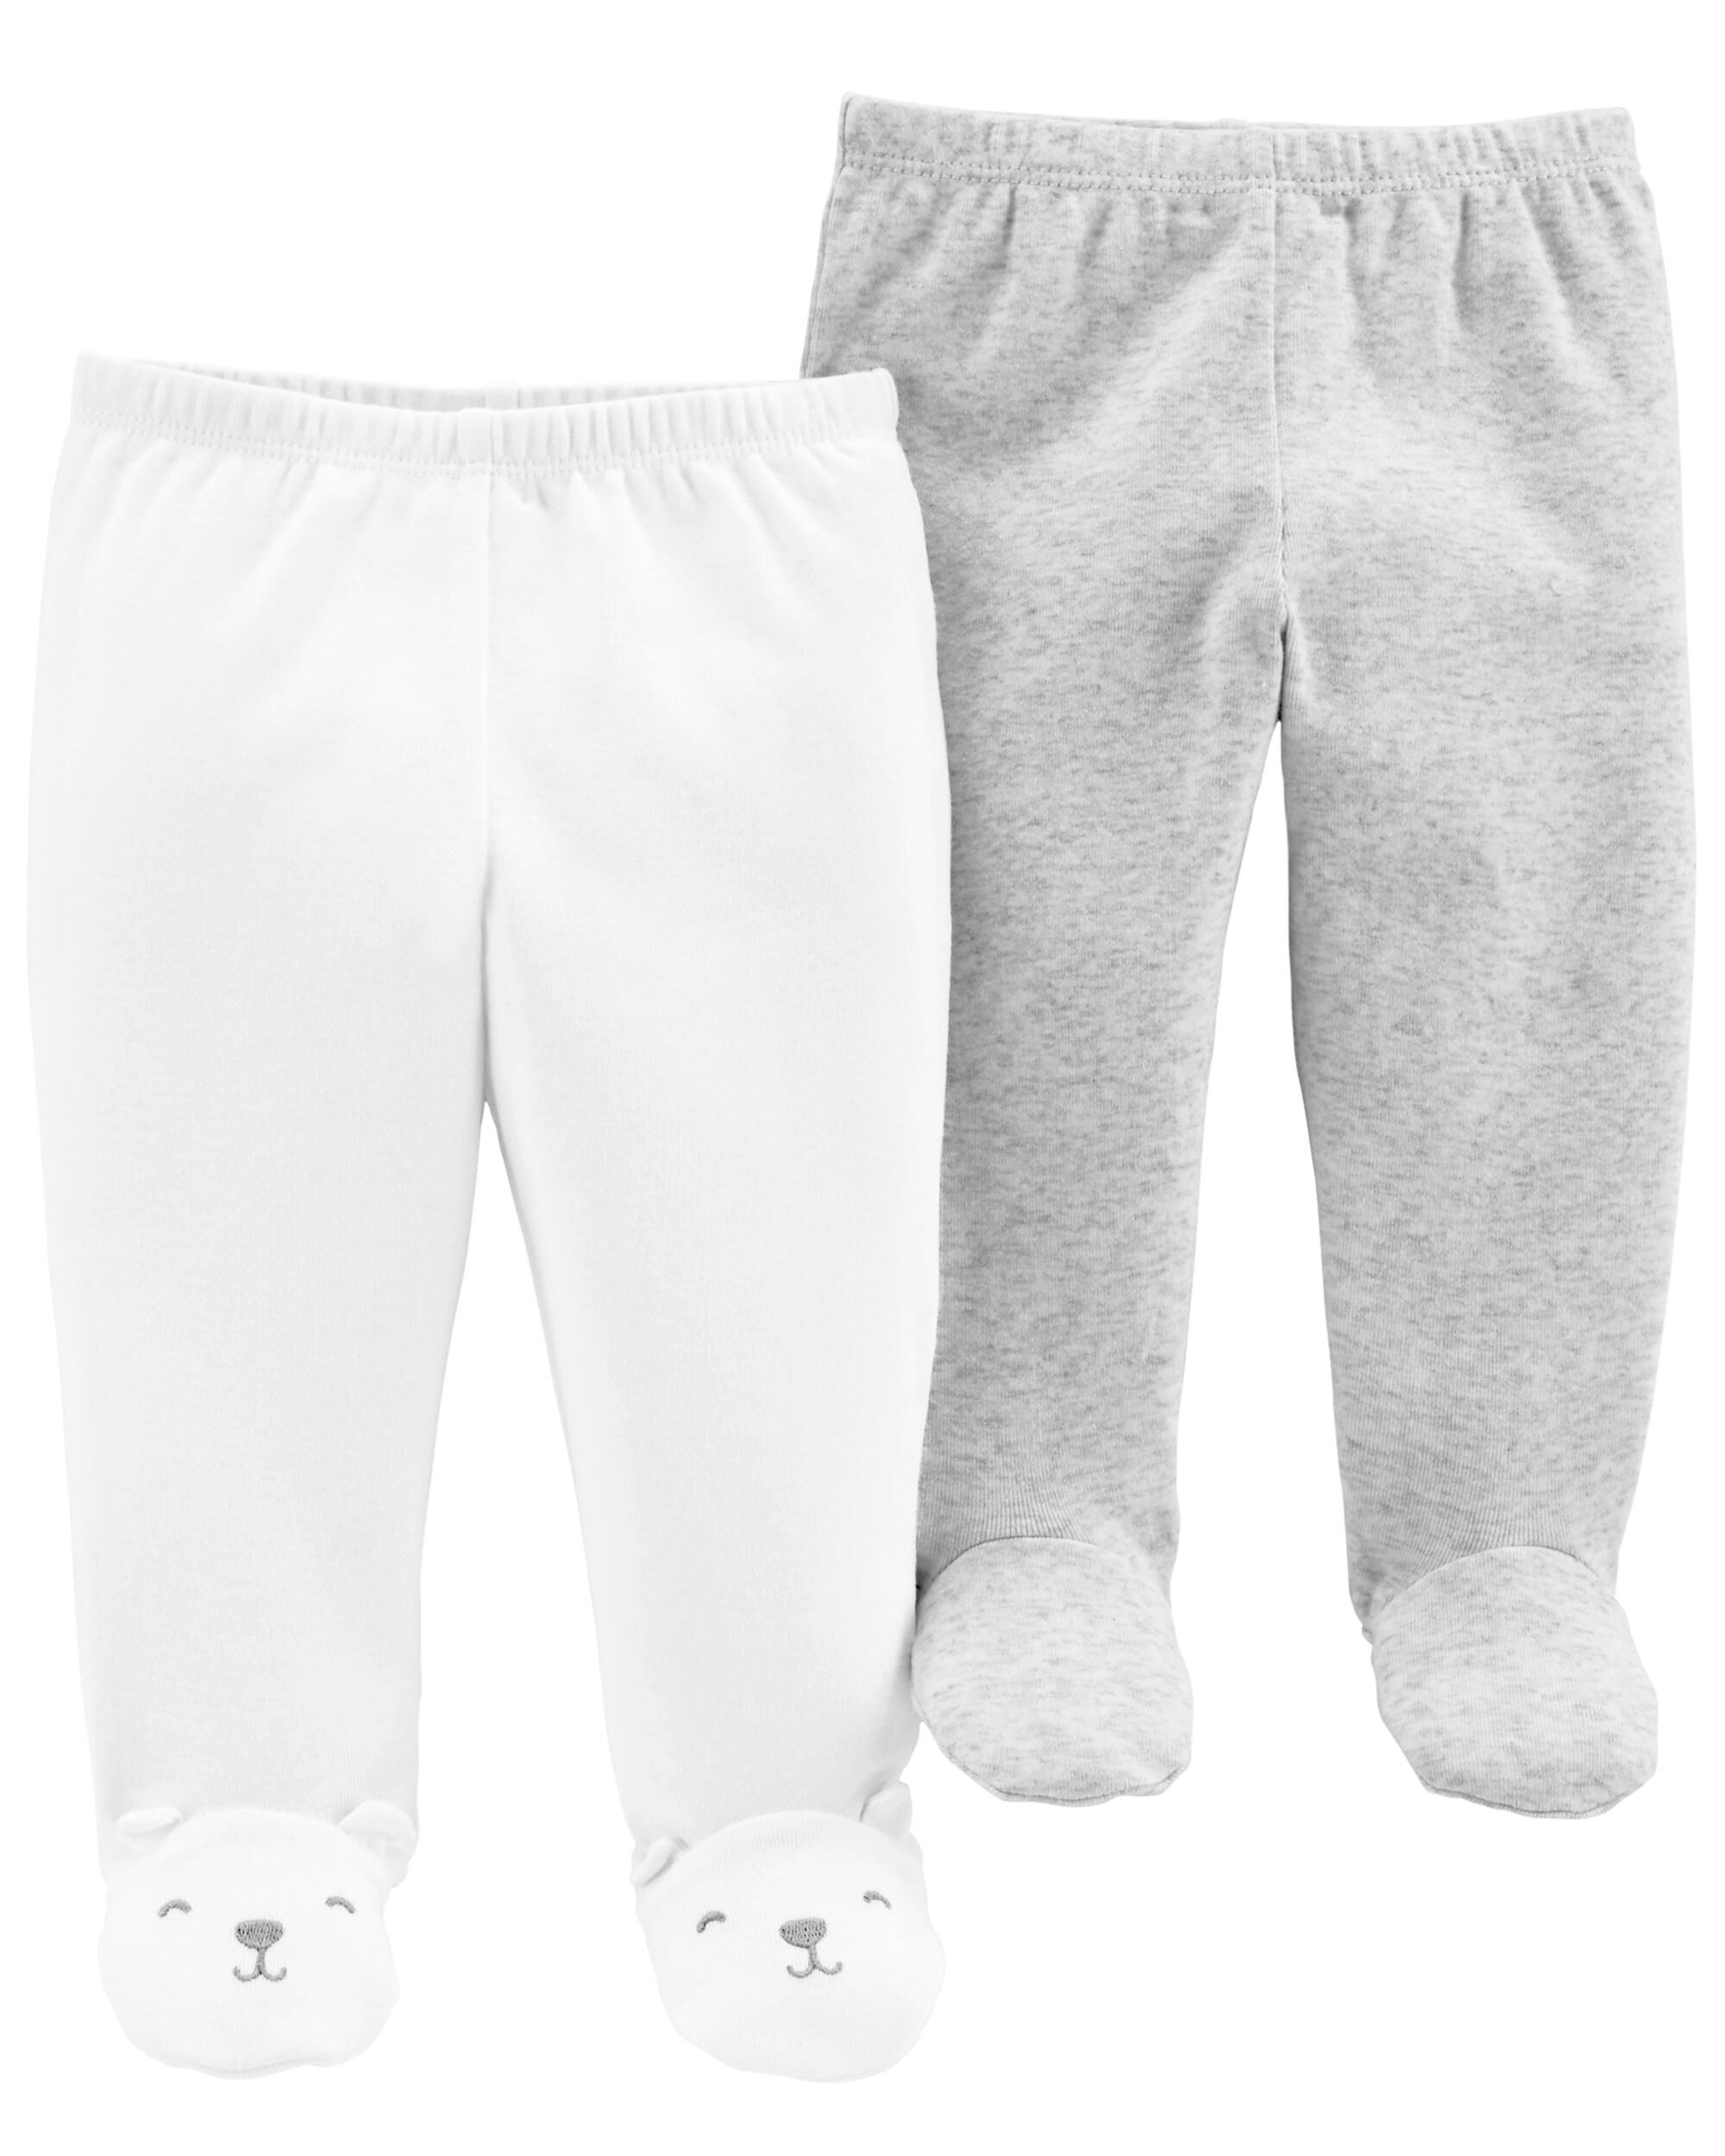 pants with socks attached for babies